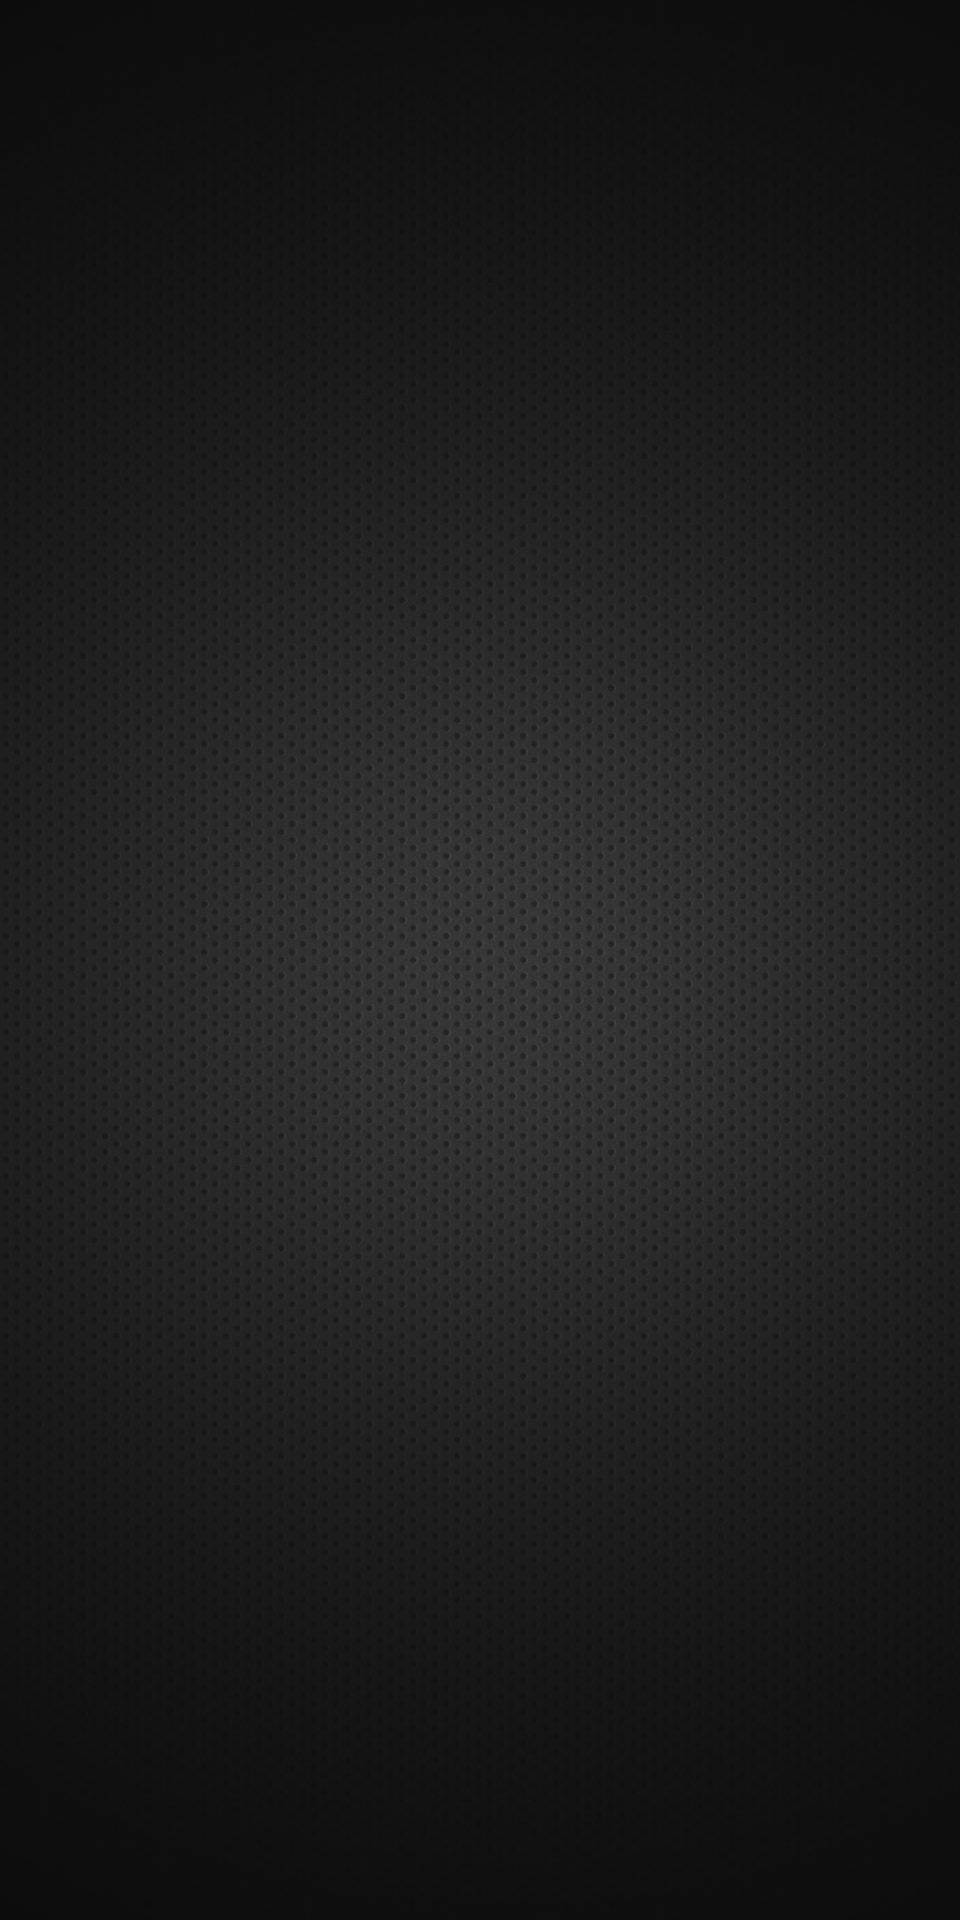 Abstract black page background Wallpaper